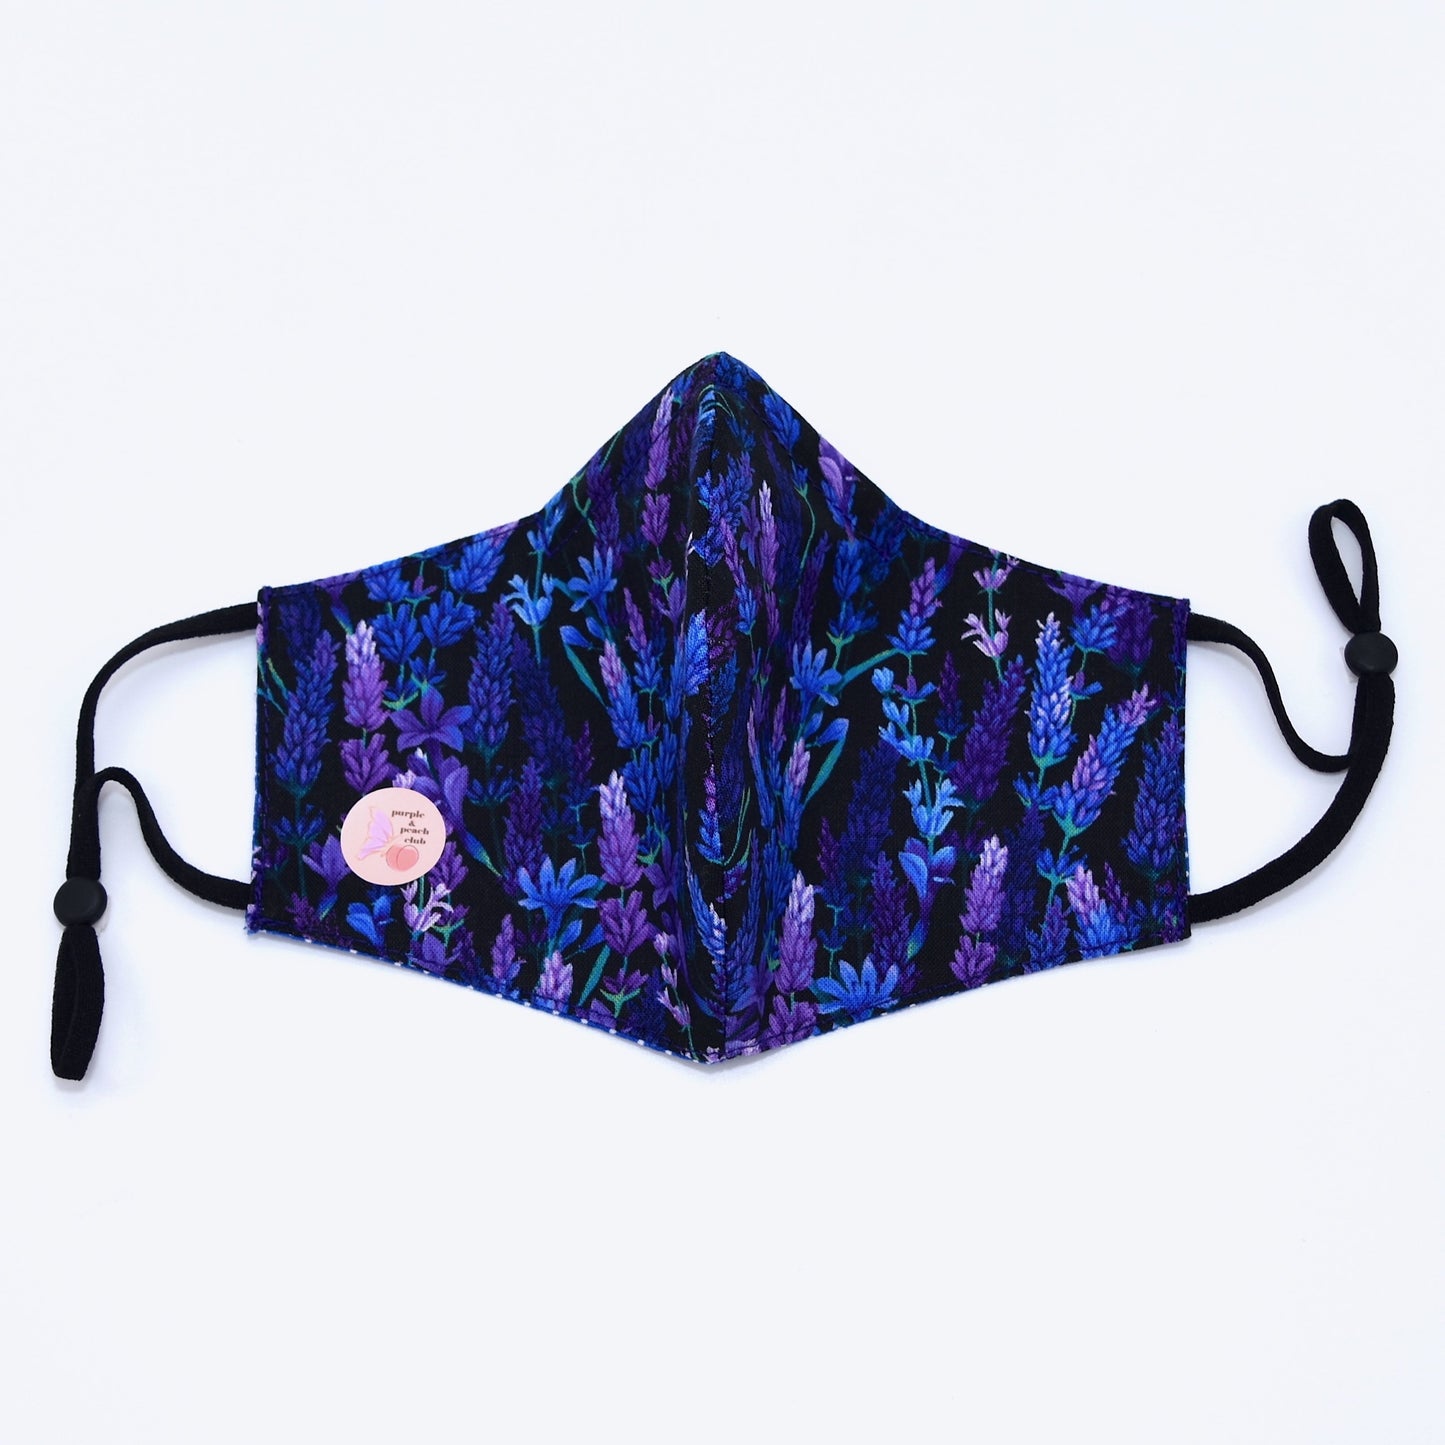 This lavender print cotton face mask is reversible and double-layered. Built with an adjustable nose bridge and adjustable ear straps. 